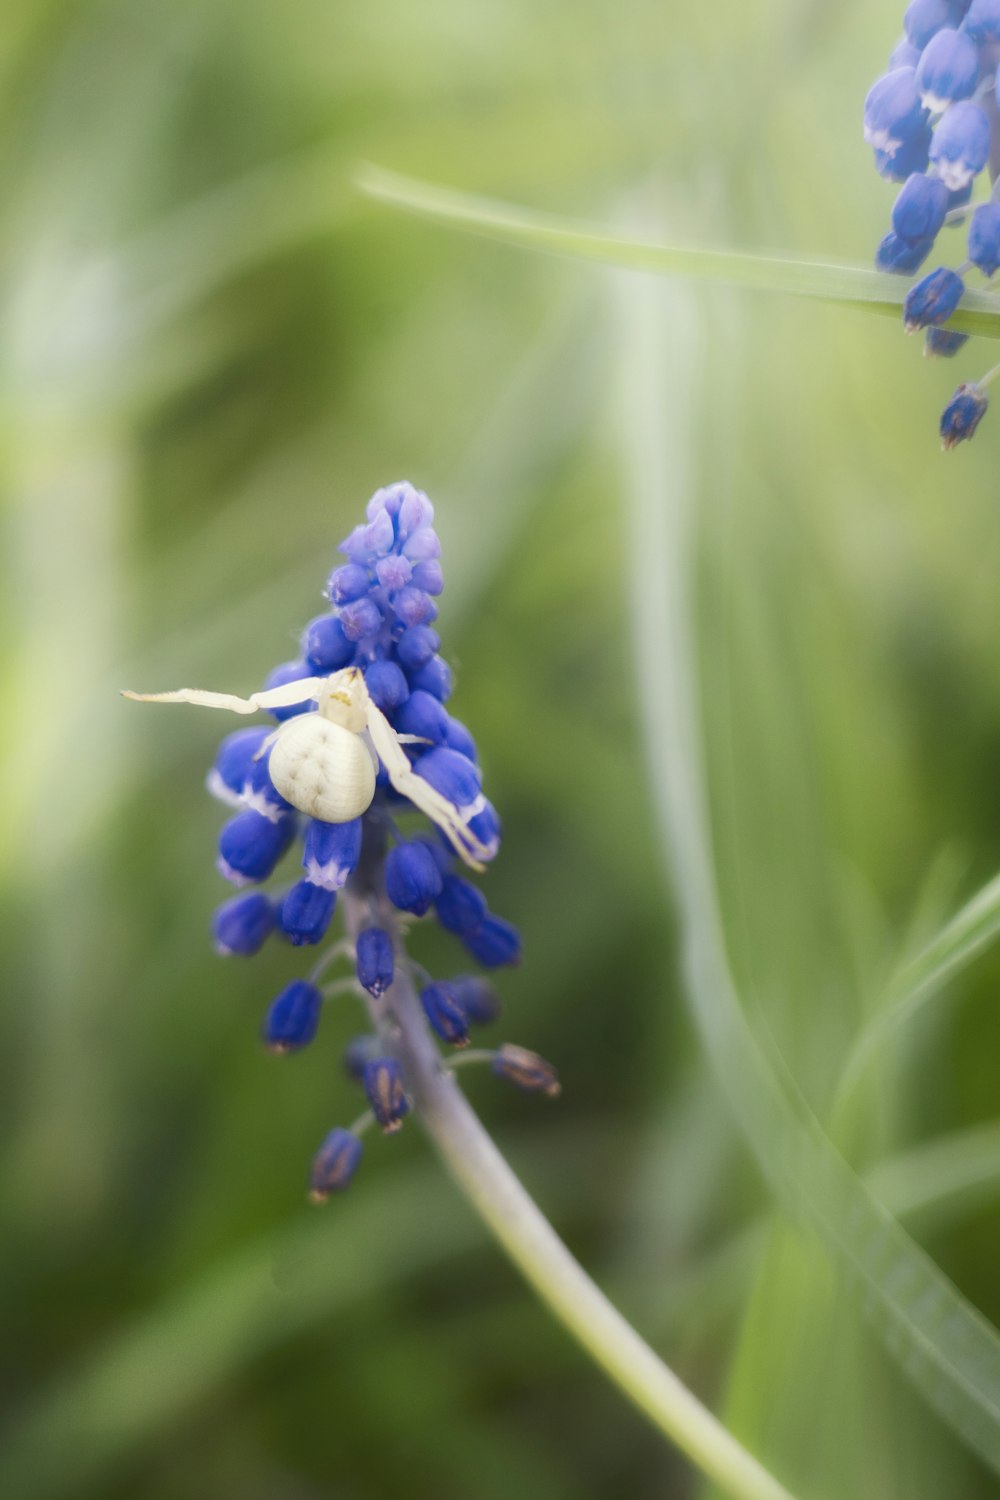 a close up of a blue flower with blurry background